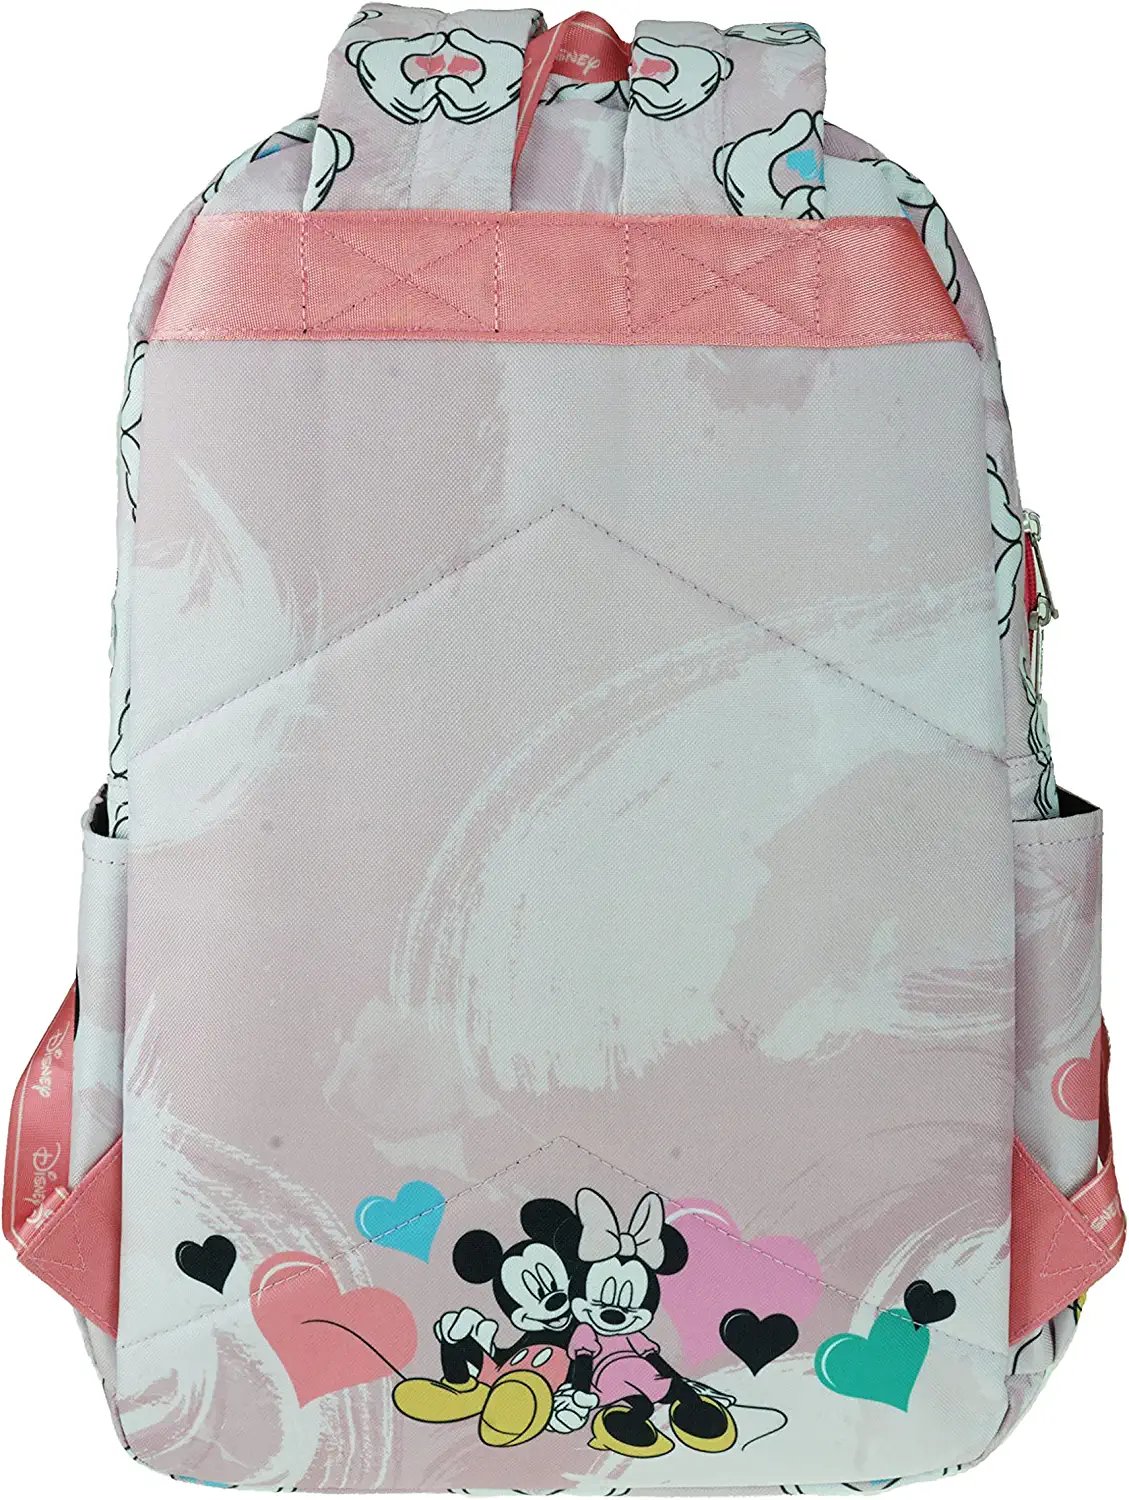 Disney Minnie Mouse Backpack 17" with Laptop Compartment for School, Travel, and Work - image 4 of 7